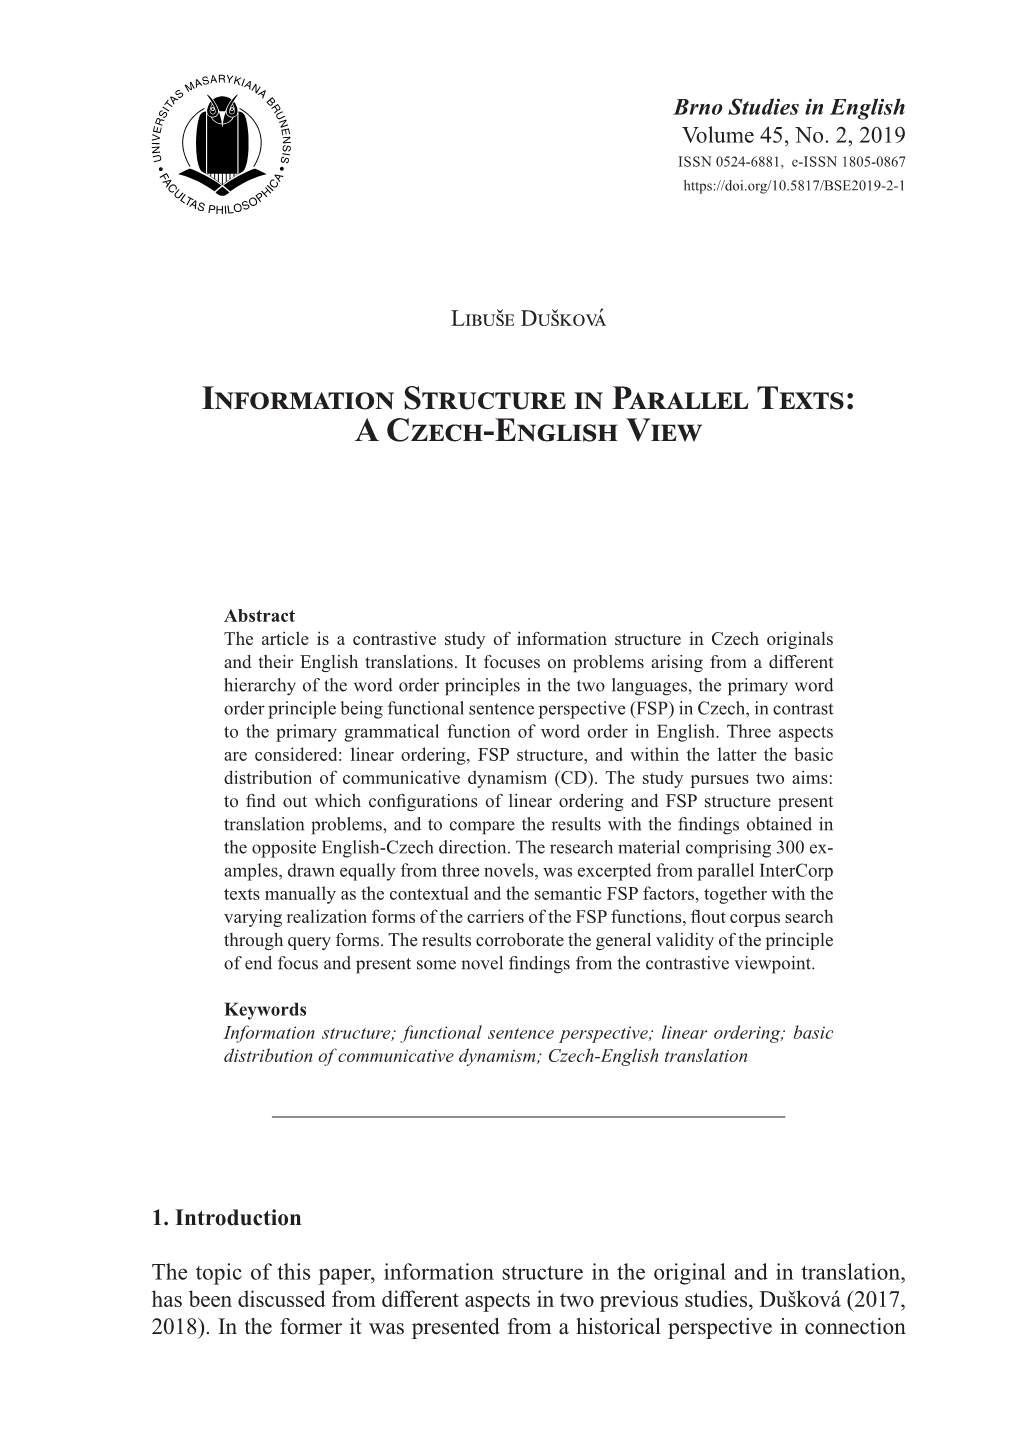 Information Structure in Parallel Texts: a Czech-English View